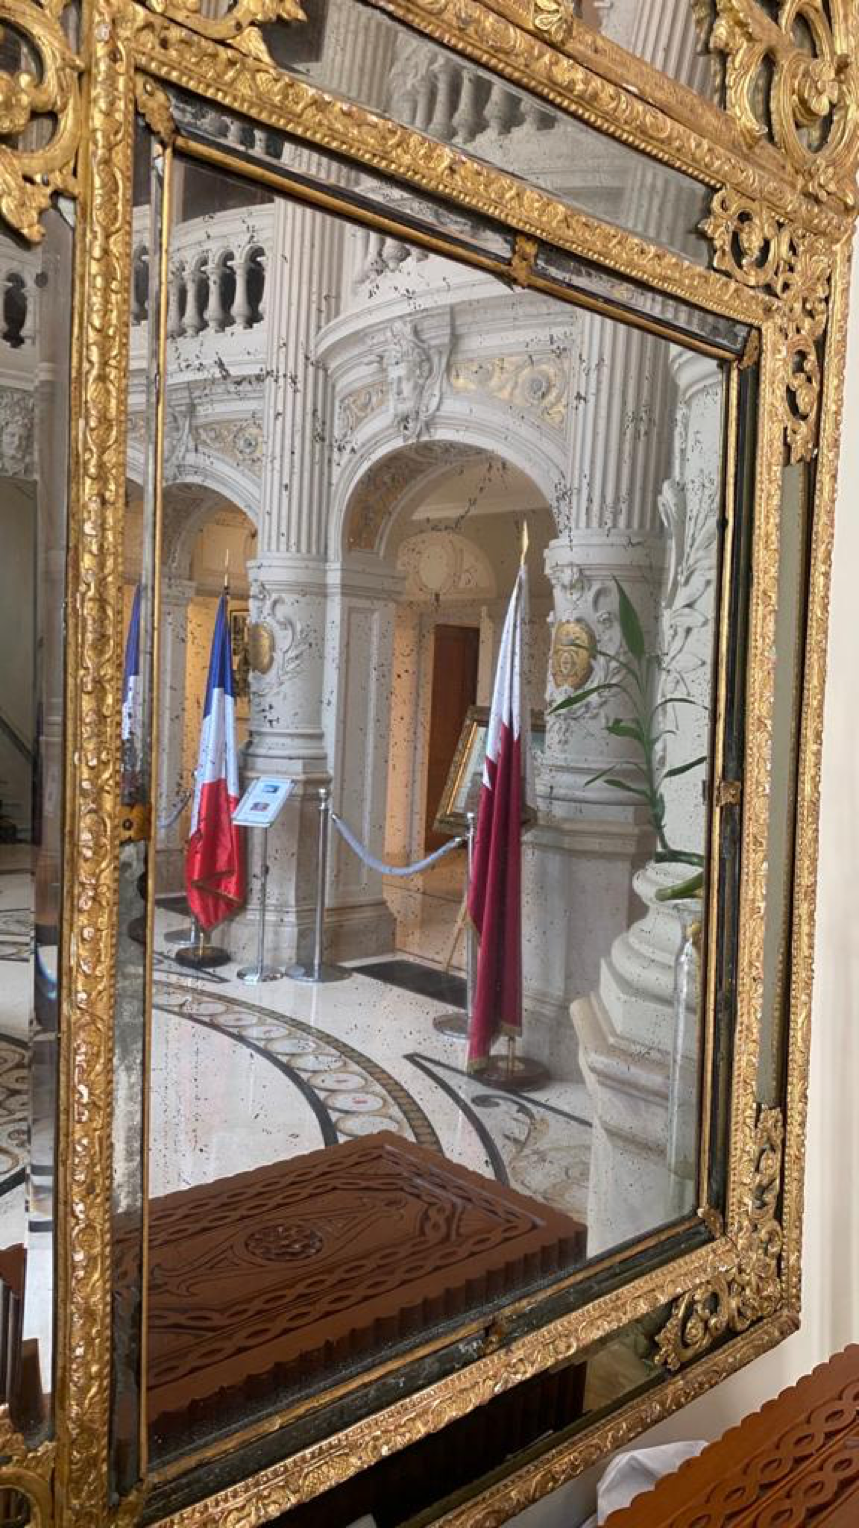 Reflection in a gold-framed mirror of the France and Qatar flags side by side at the  Qatar Embassy in France.